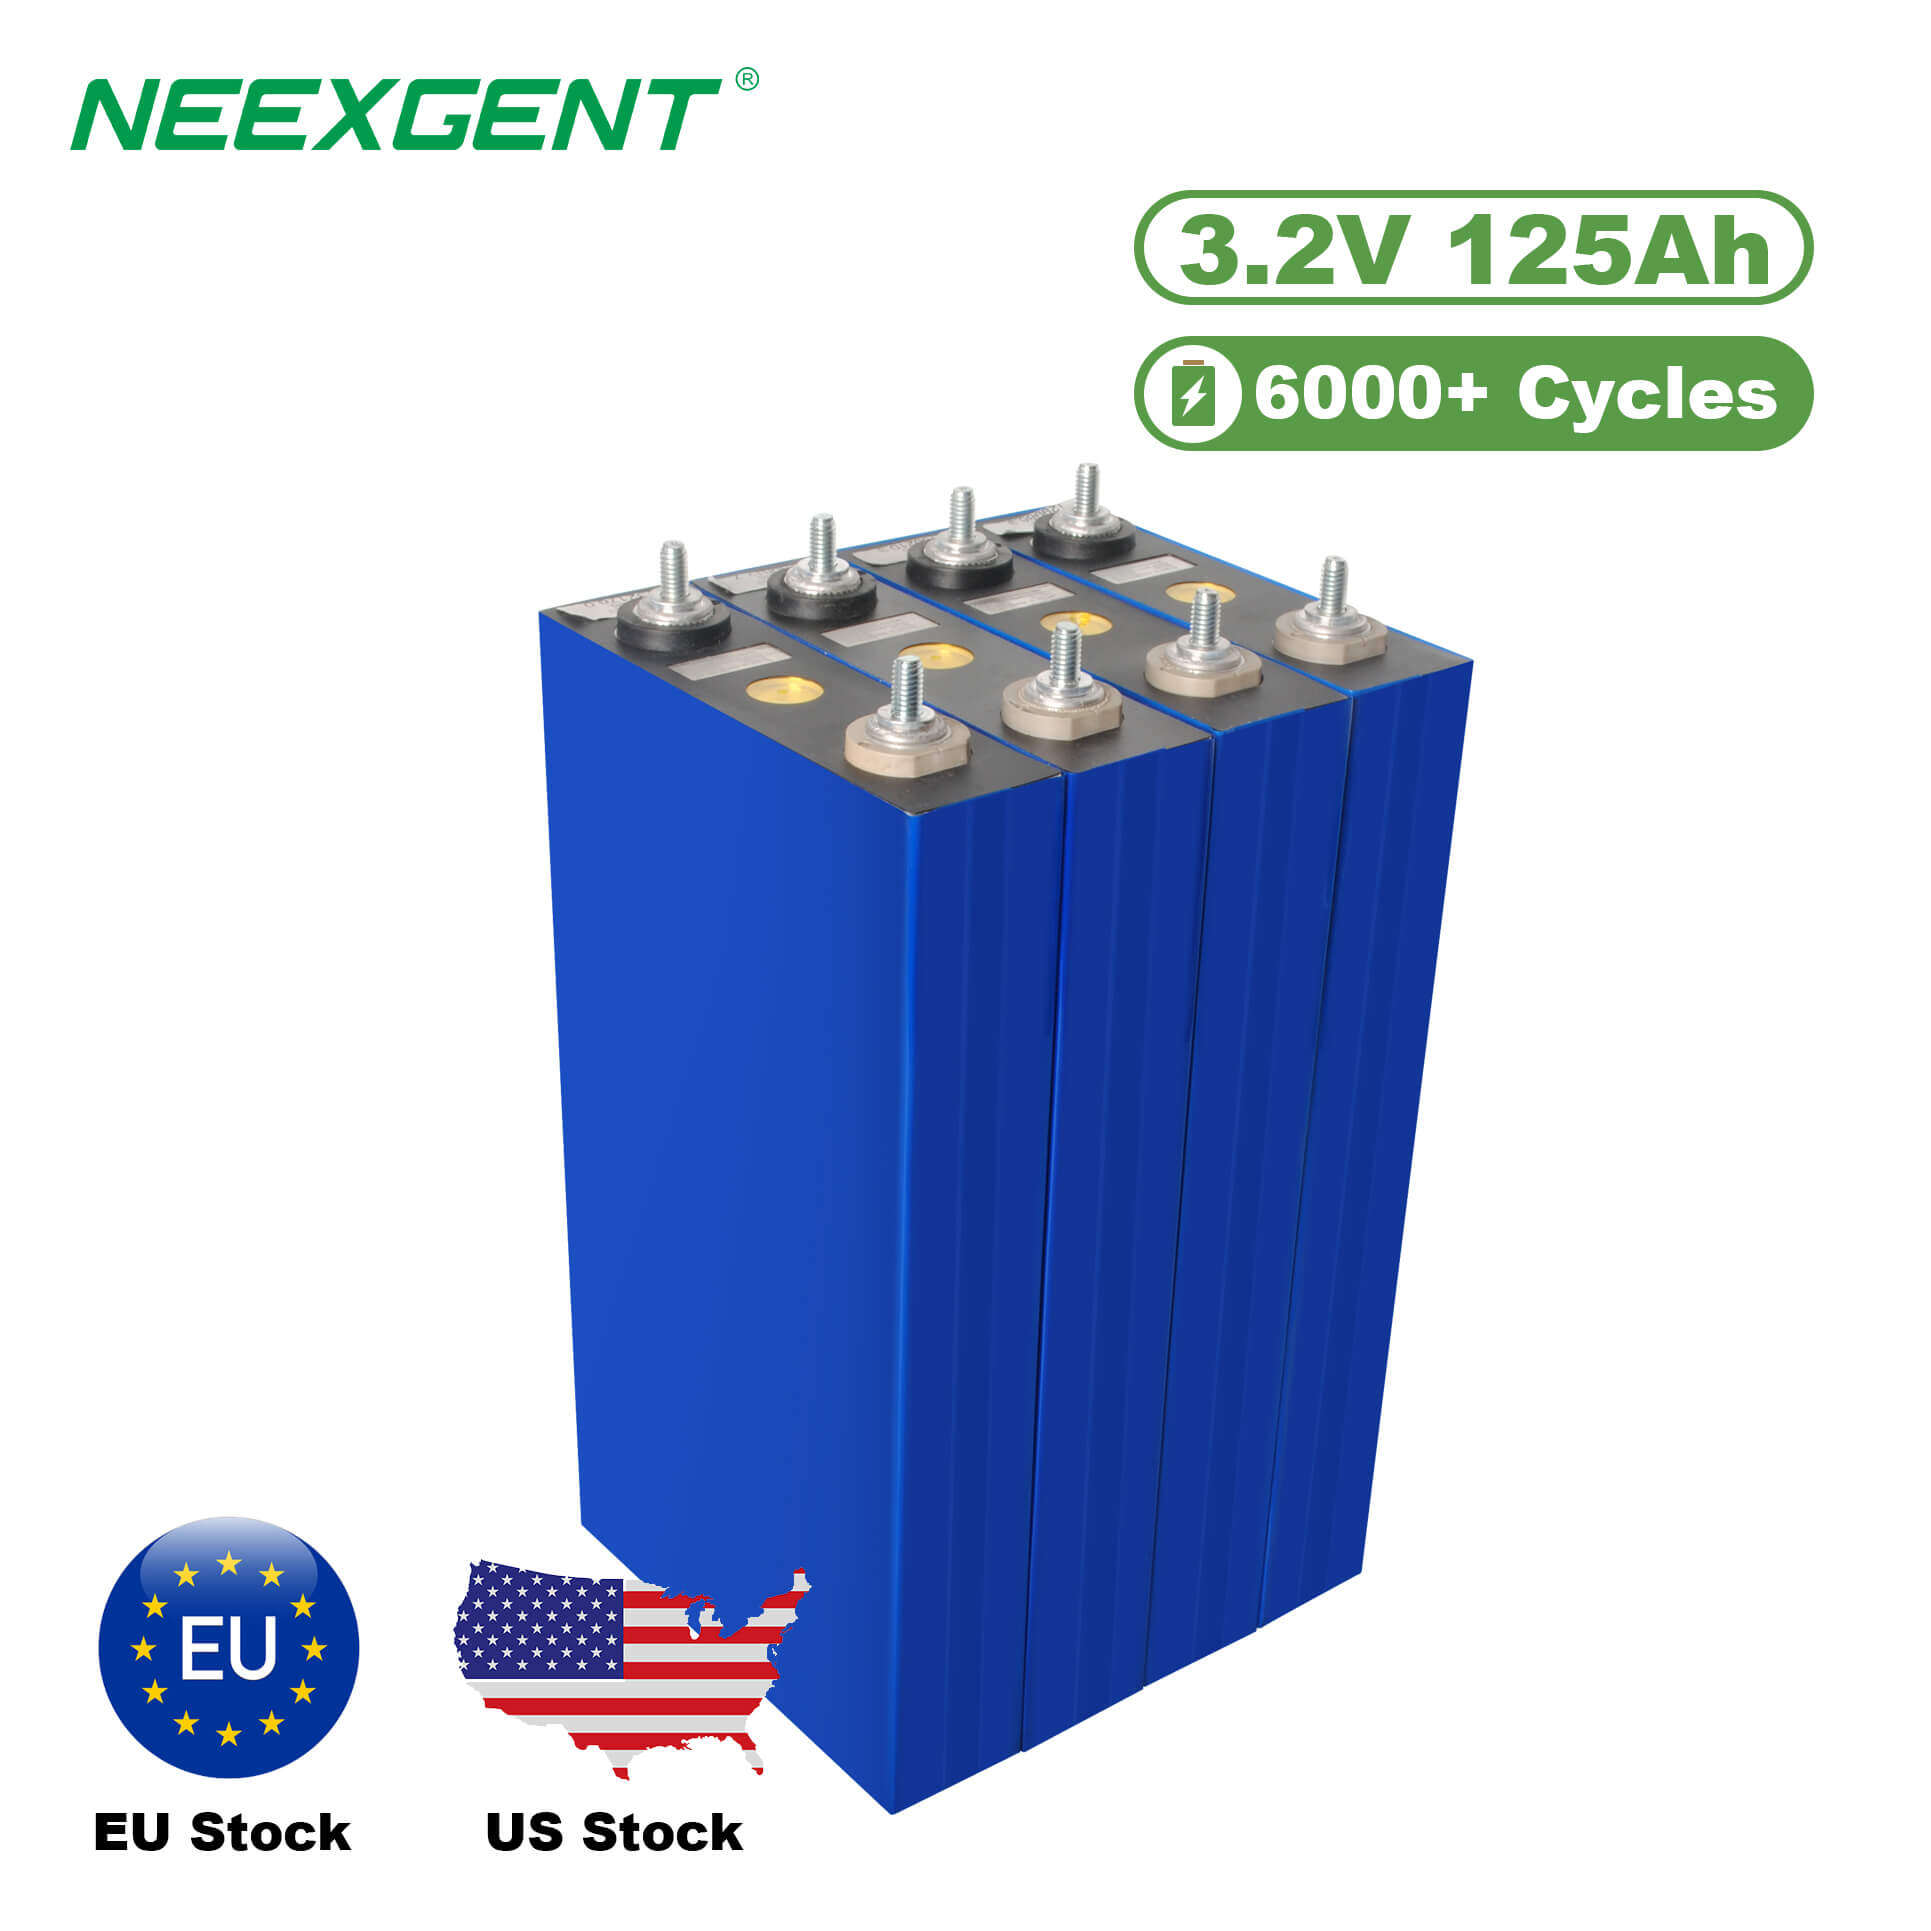 Neexgent Lithium Ion Battery Lifepo4 Cell 125ah 3.2v Lifepo4 Battery